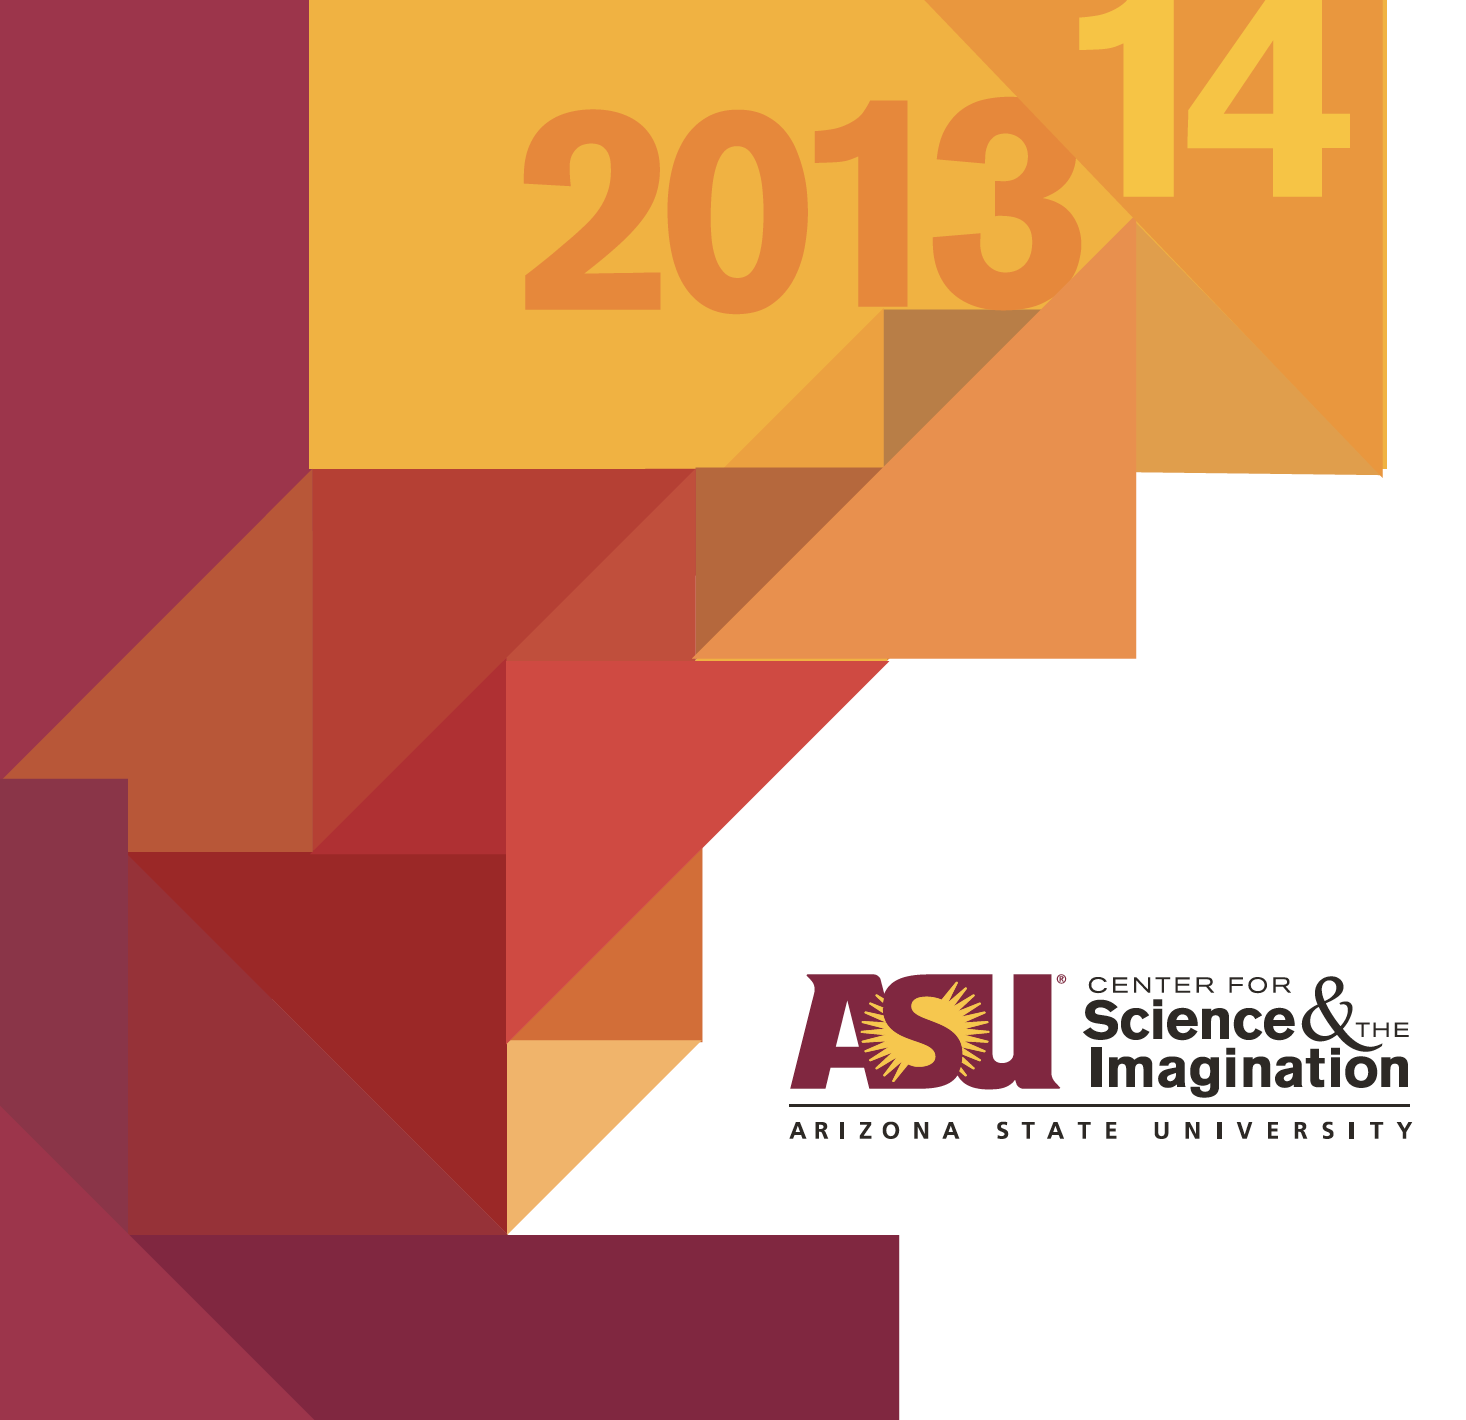 Digital art of squares and triangles, arranged around the page. with type that reads 2013, 2014. The ASU Center for Science and the Imagination logo in the bottom right corner.